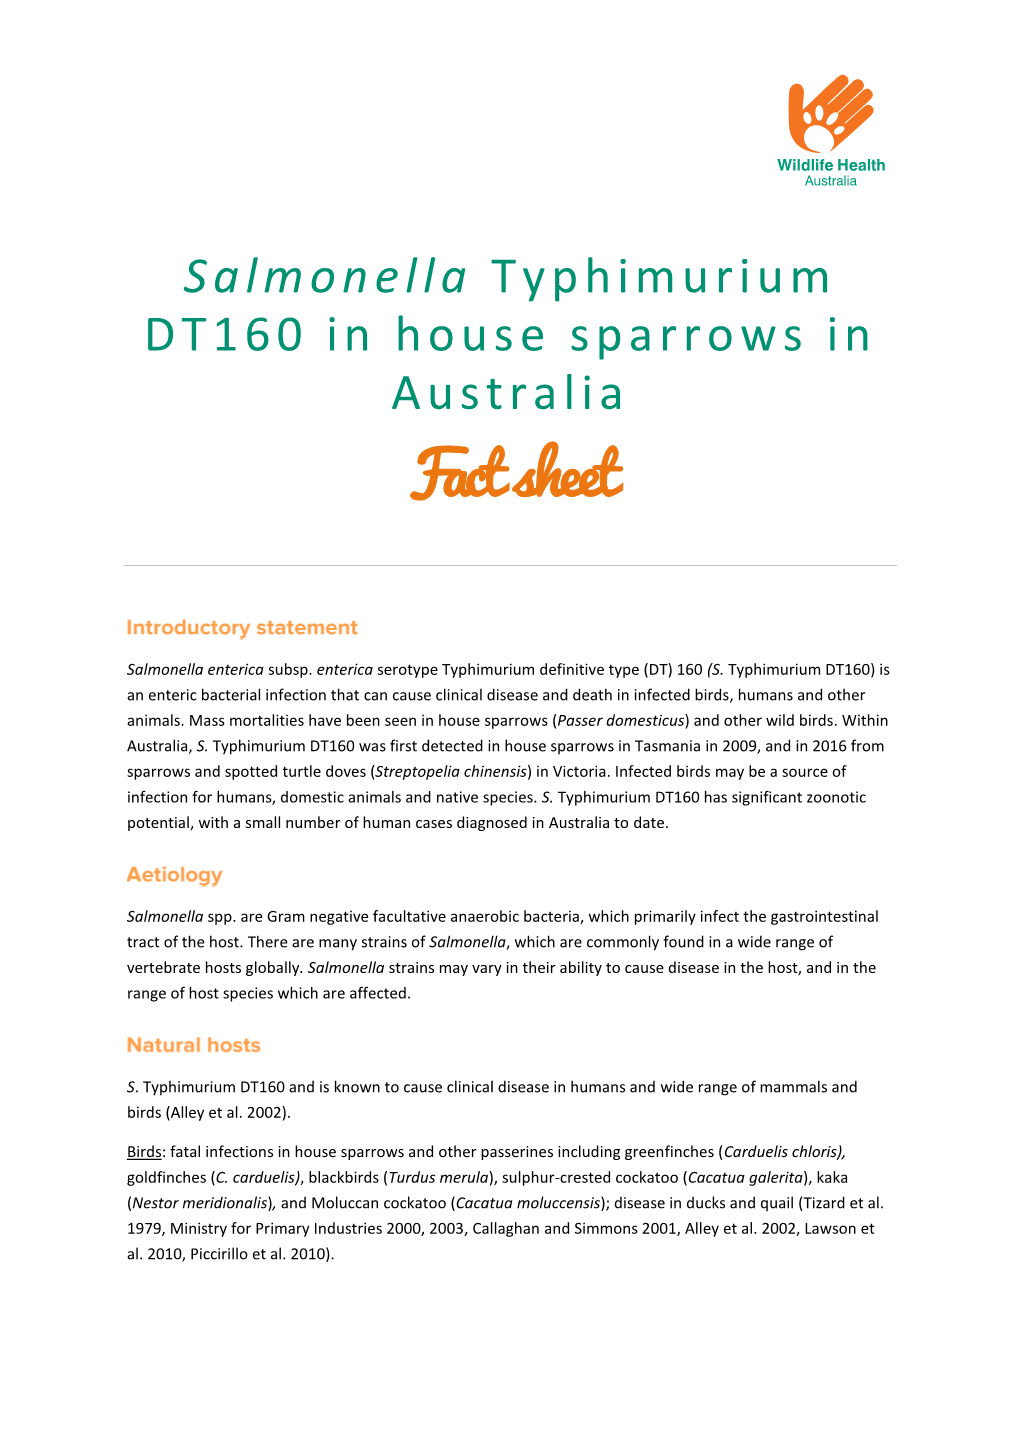 Salmonella Typhimurium DT160 in House Sparrows in Australia Fact Sheet